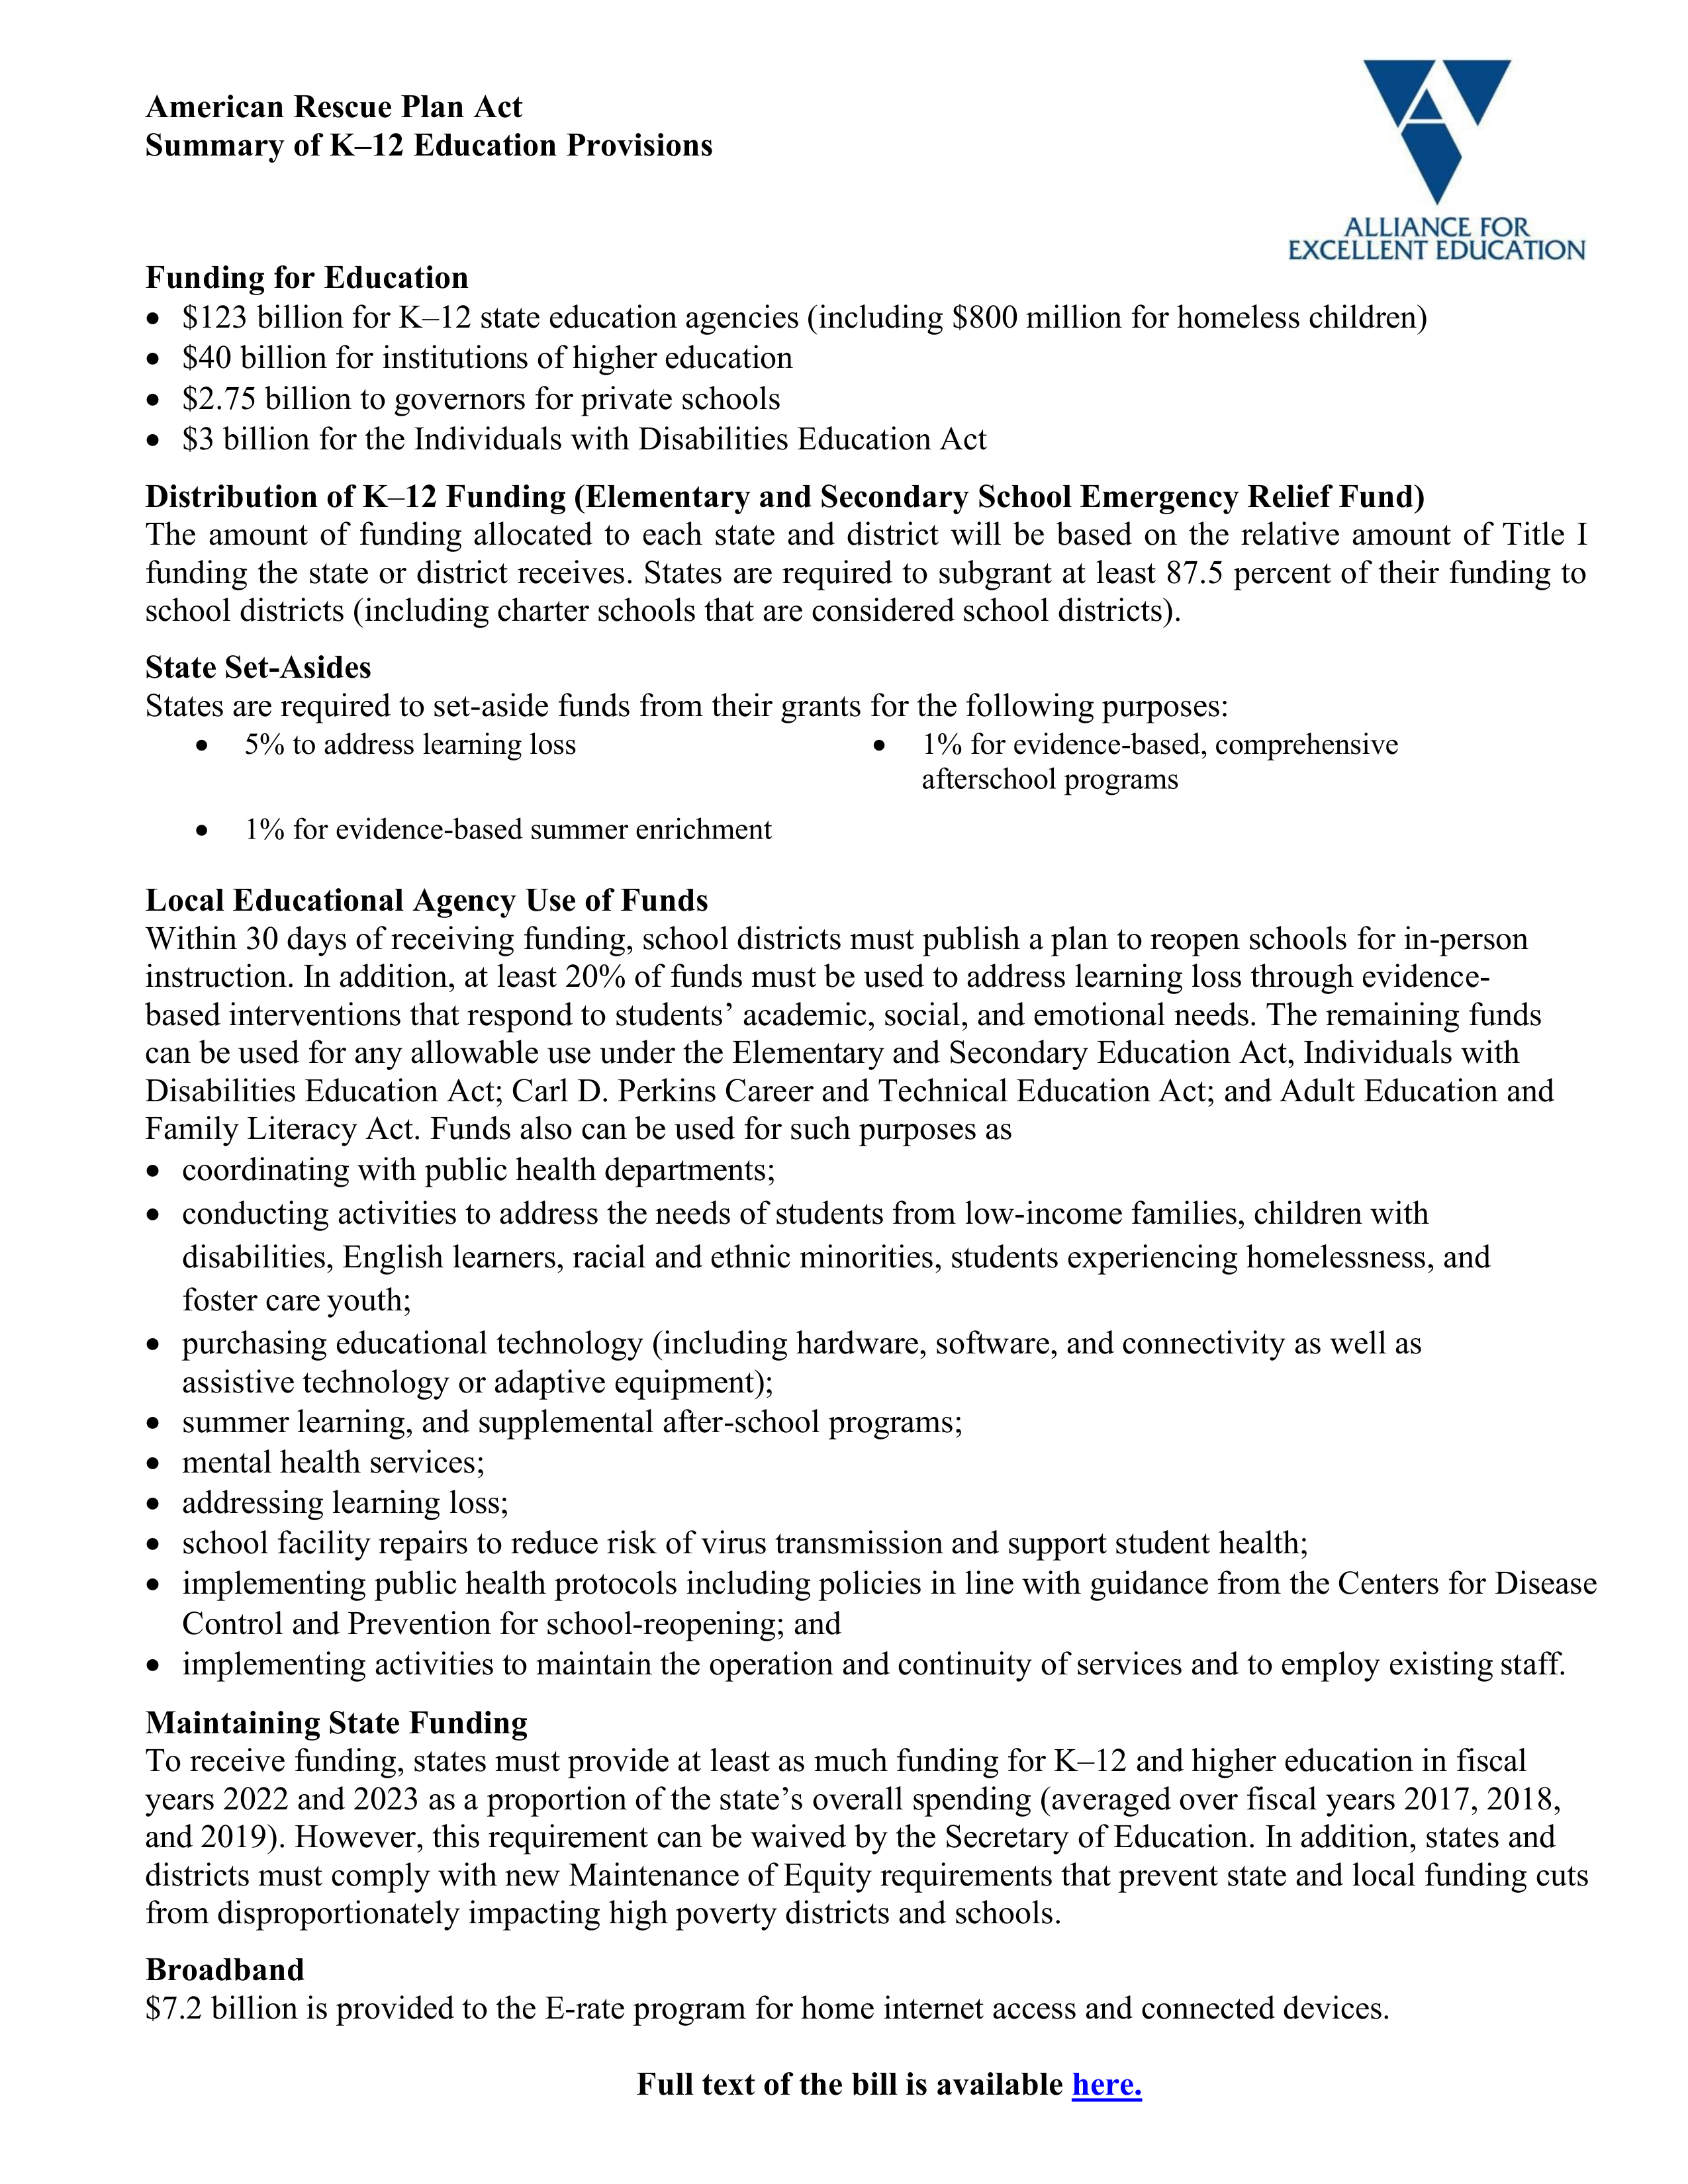 American-Rescue-Plan-Act-Summary (1)